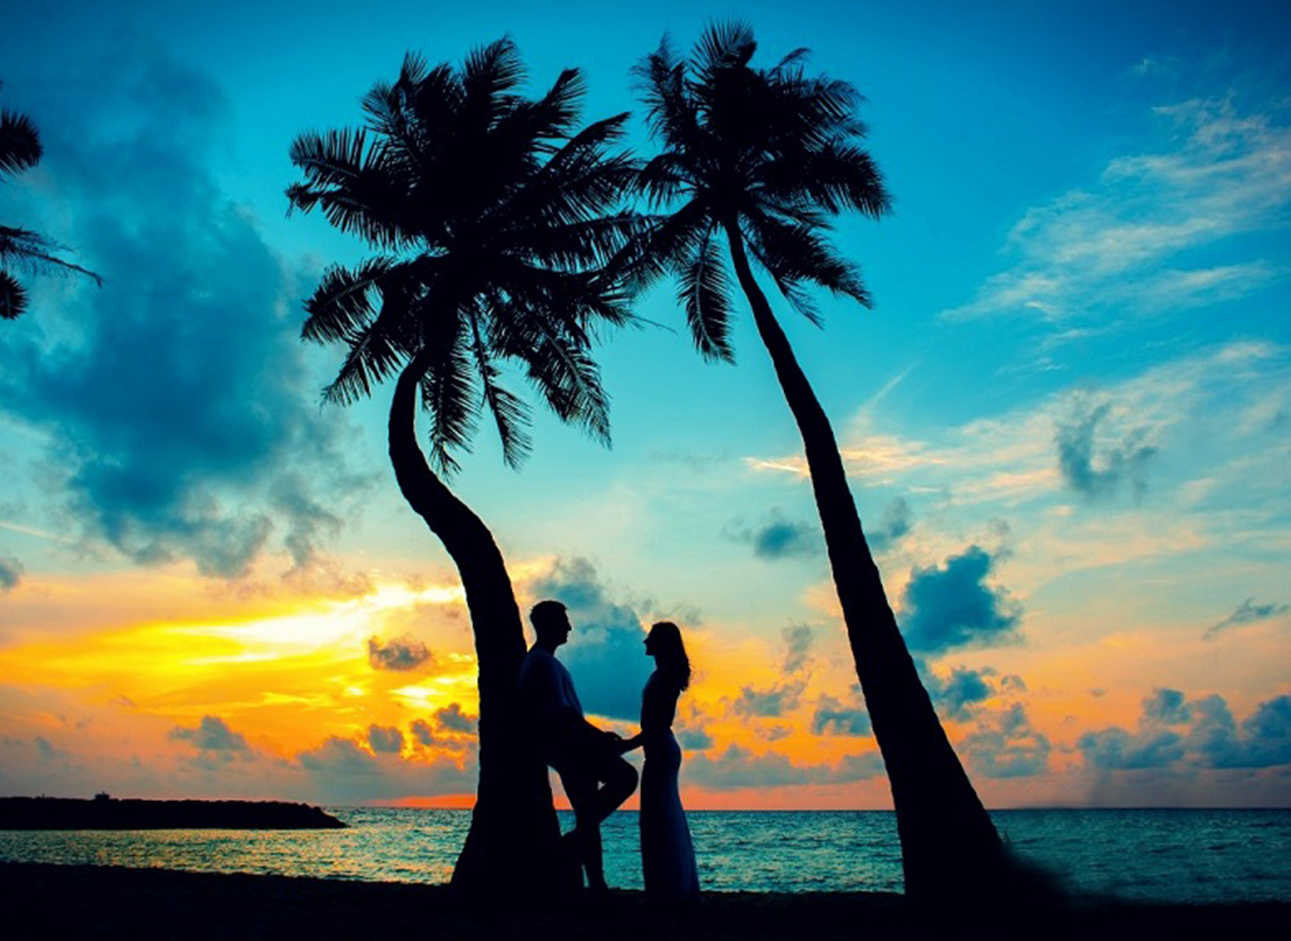 Honeymoon - Celebrate your love with a romantic and unforgettable honeymoon